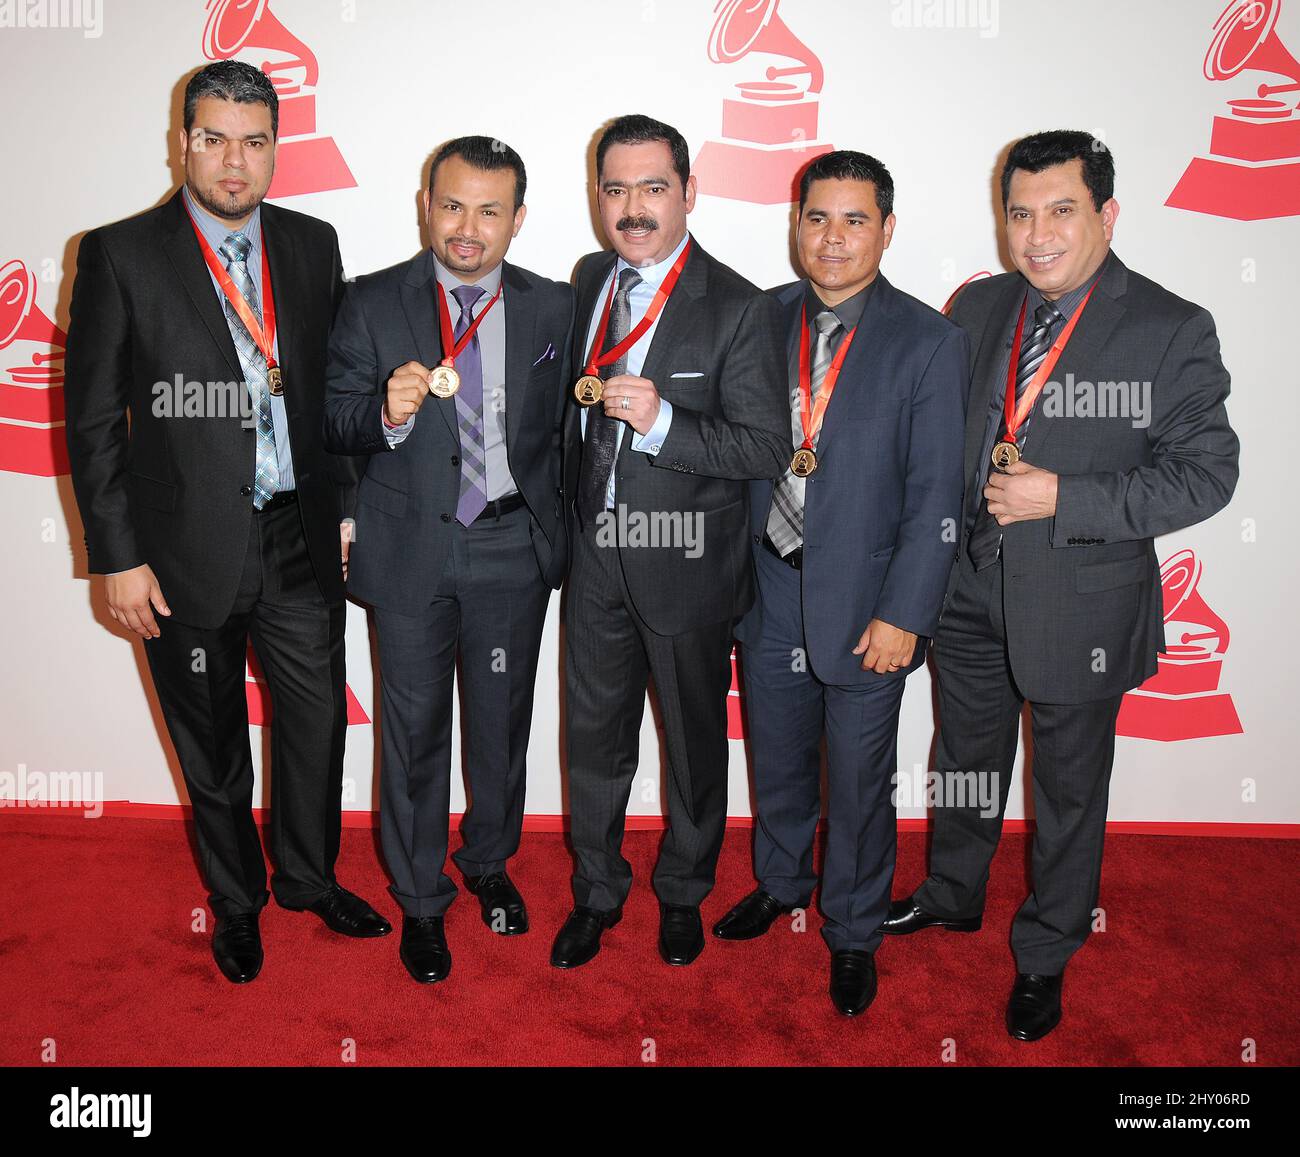 Los Tucanes nimmt an der Latin Recording Academy Person of the Year Tribute to Caetano Veloso 2012 in der MGM Grand Garden Arena in Las Vegas, USA, Teil. Stockfoto